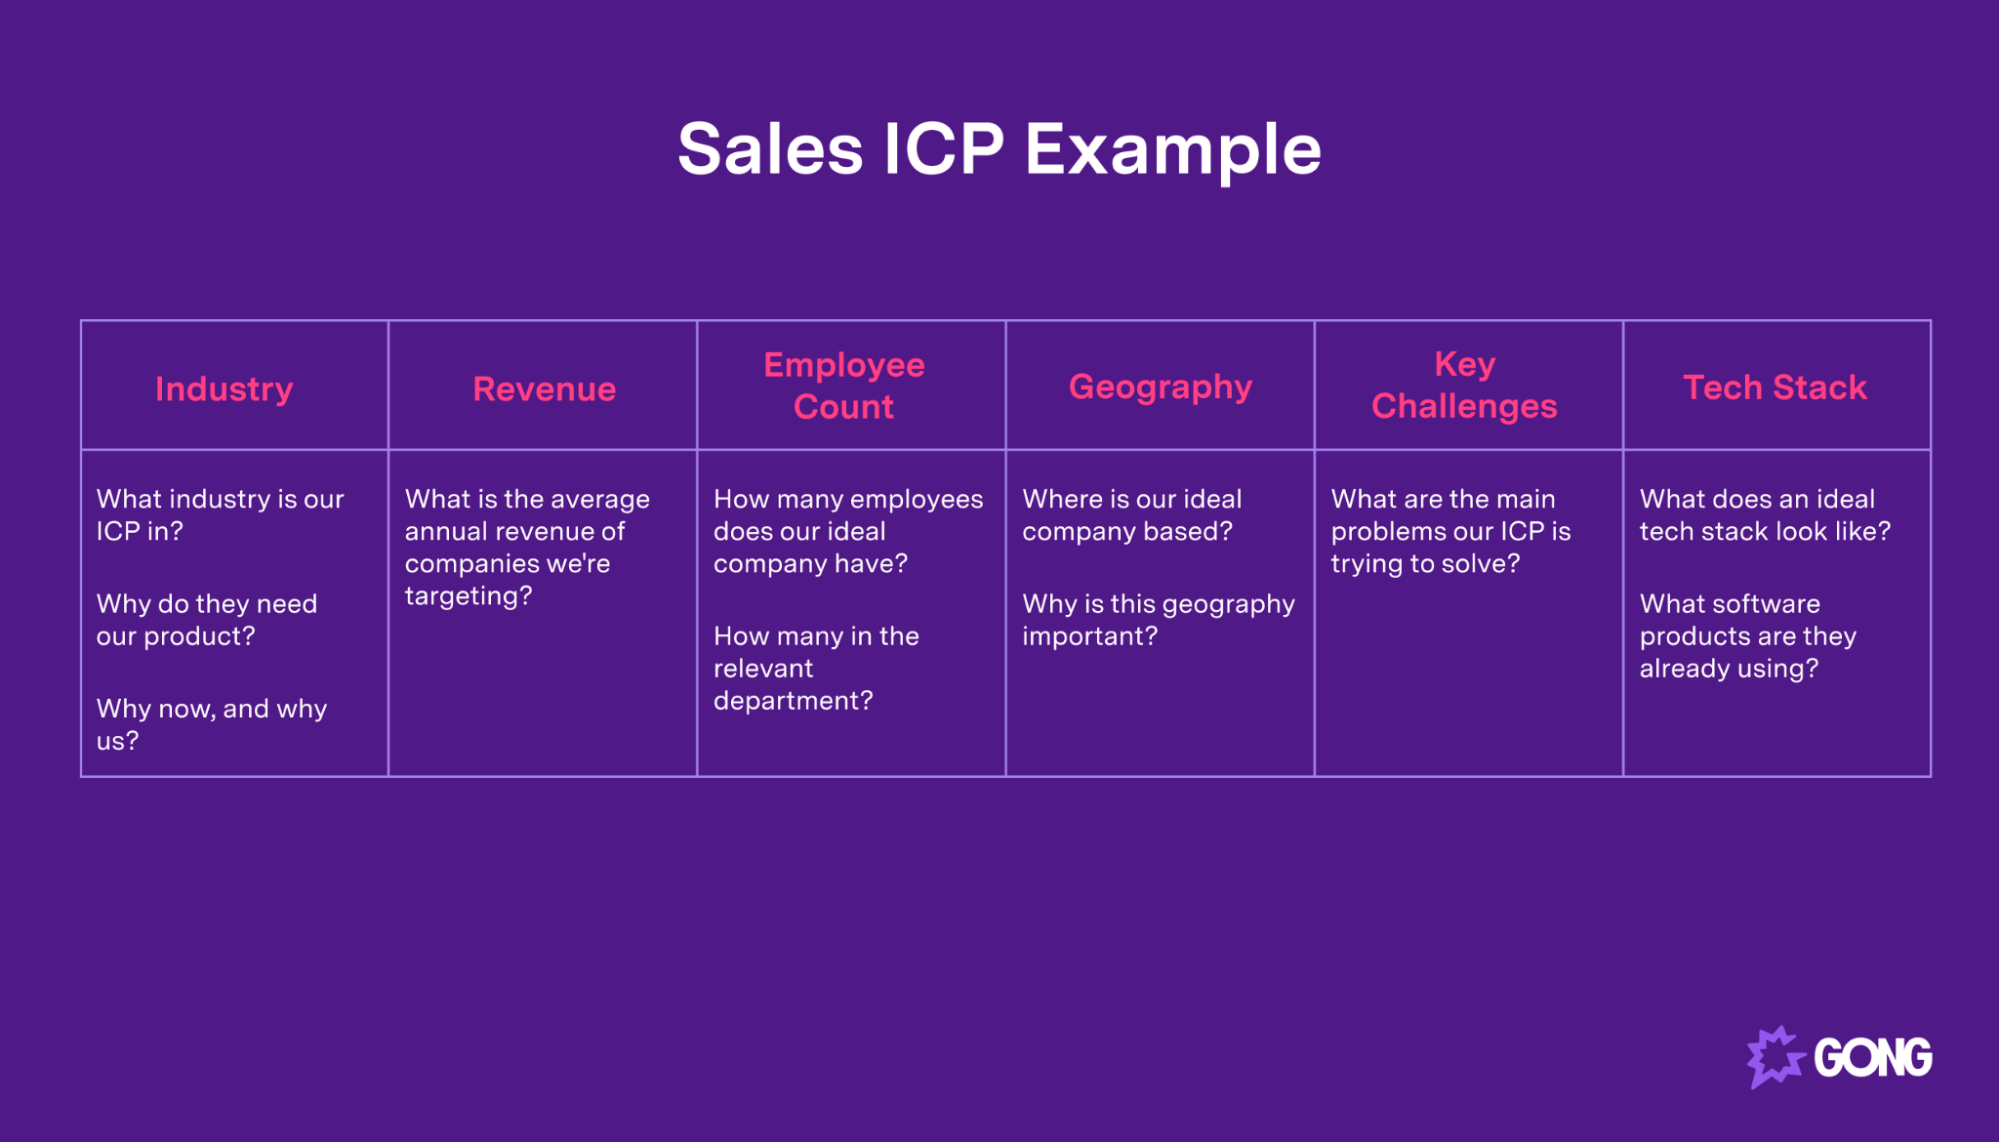 A sales ICP example